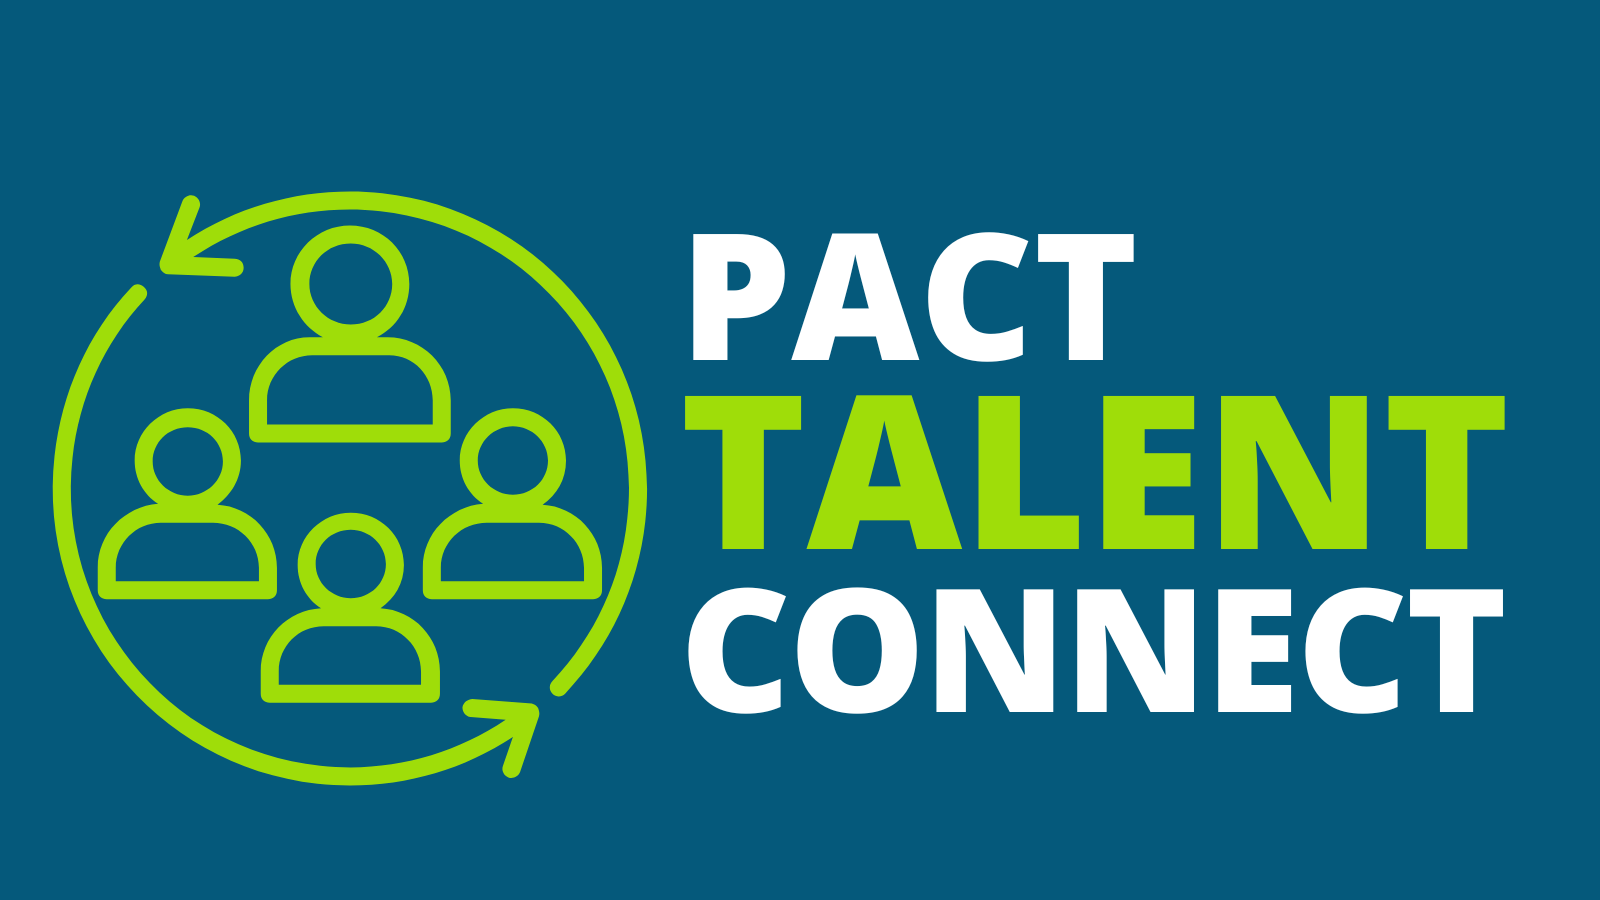 Shares the logo of the PACT Talent Connect series